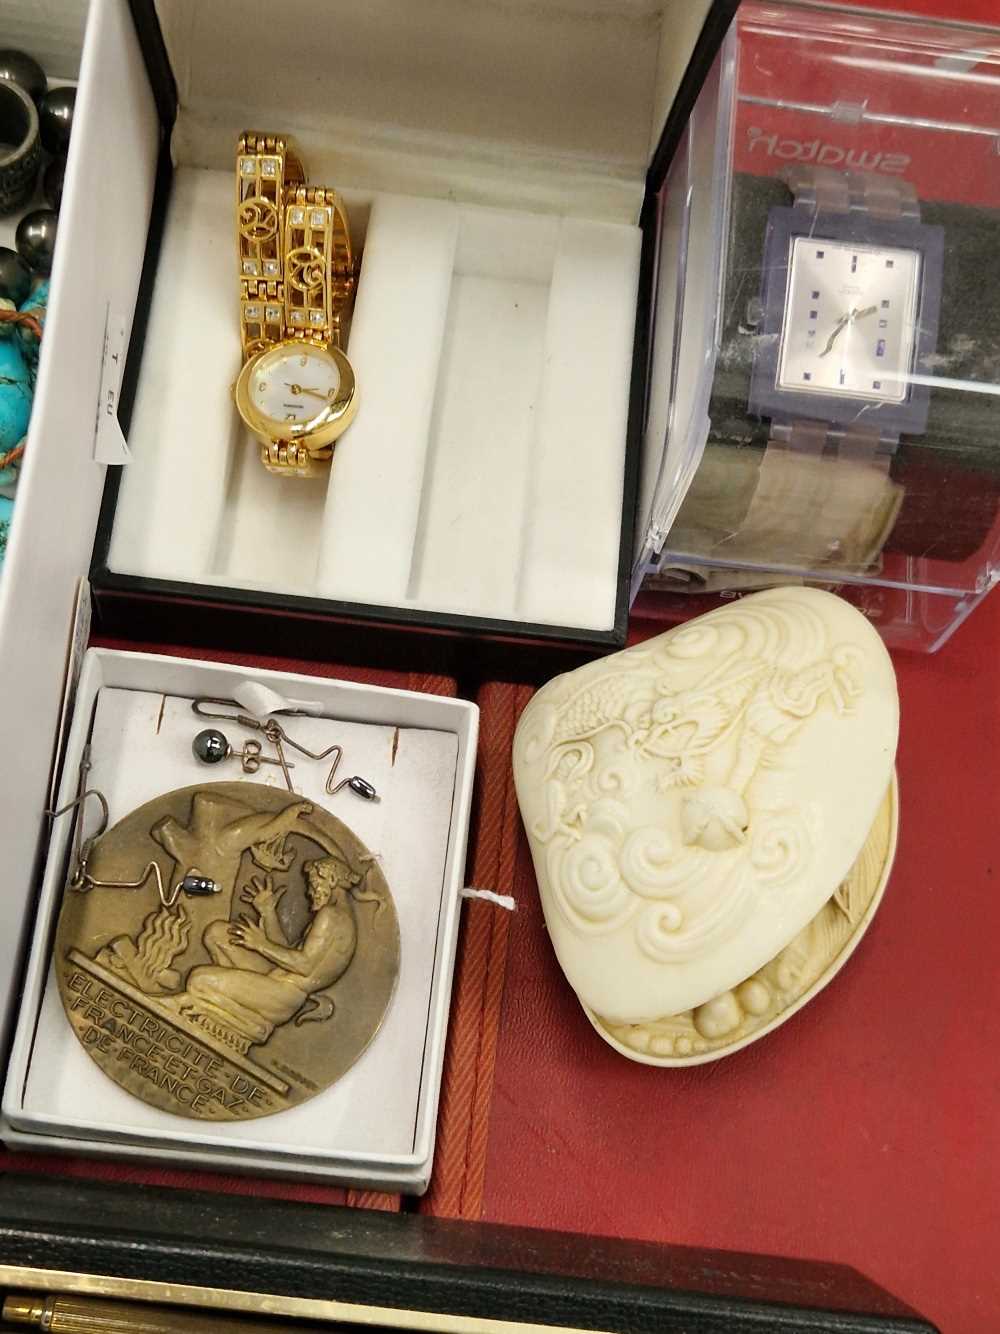 Jewellery and collectables to include silver earrings, a swatch watch, medallions, snuff bottle - Image 3 of 4